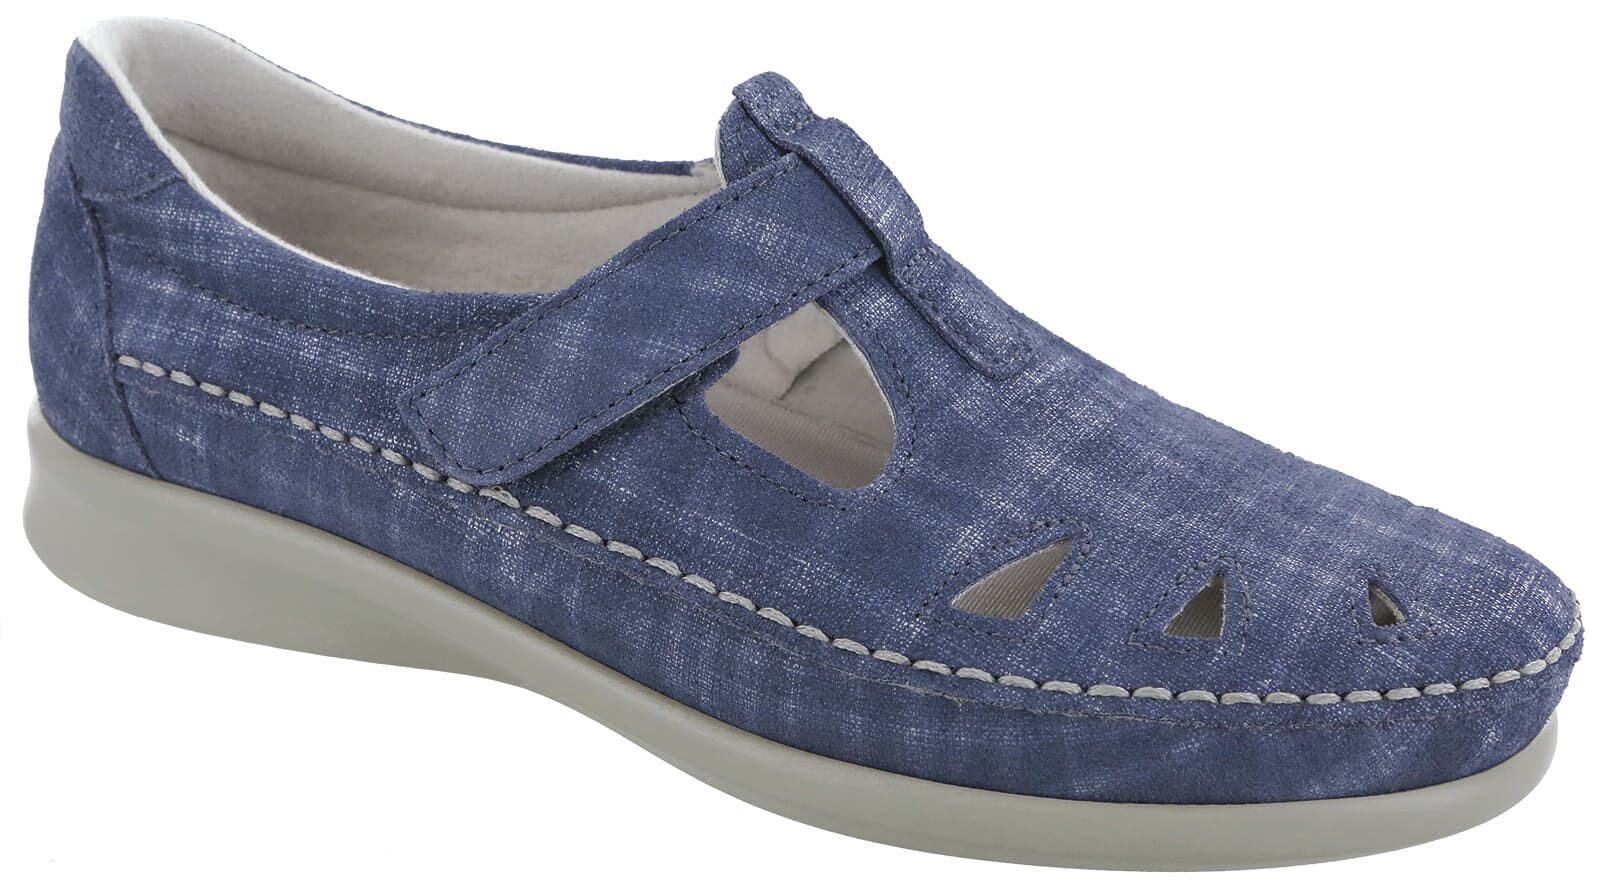 blue leather slip on shoes